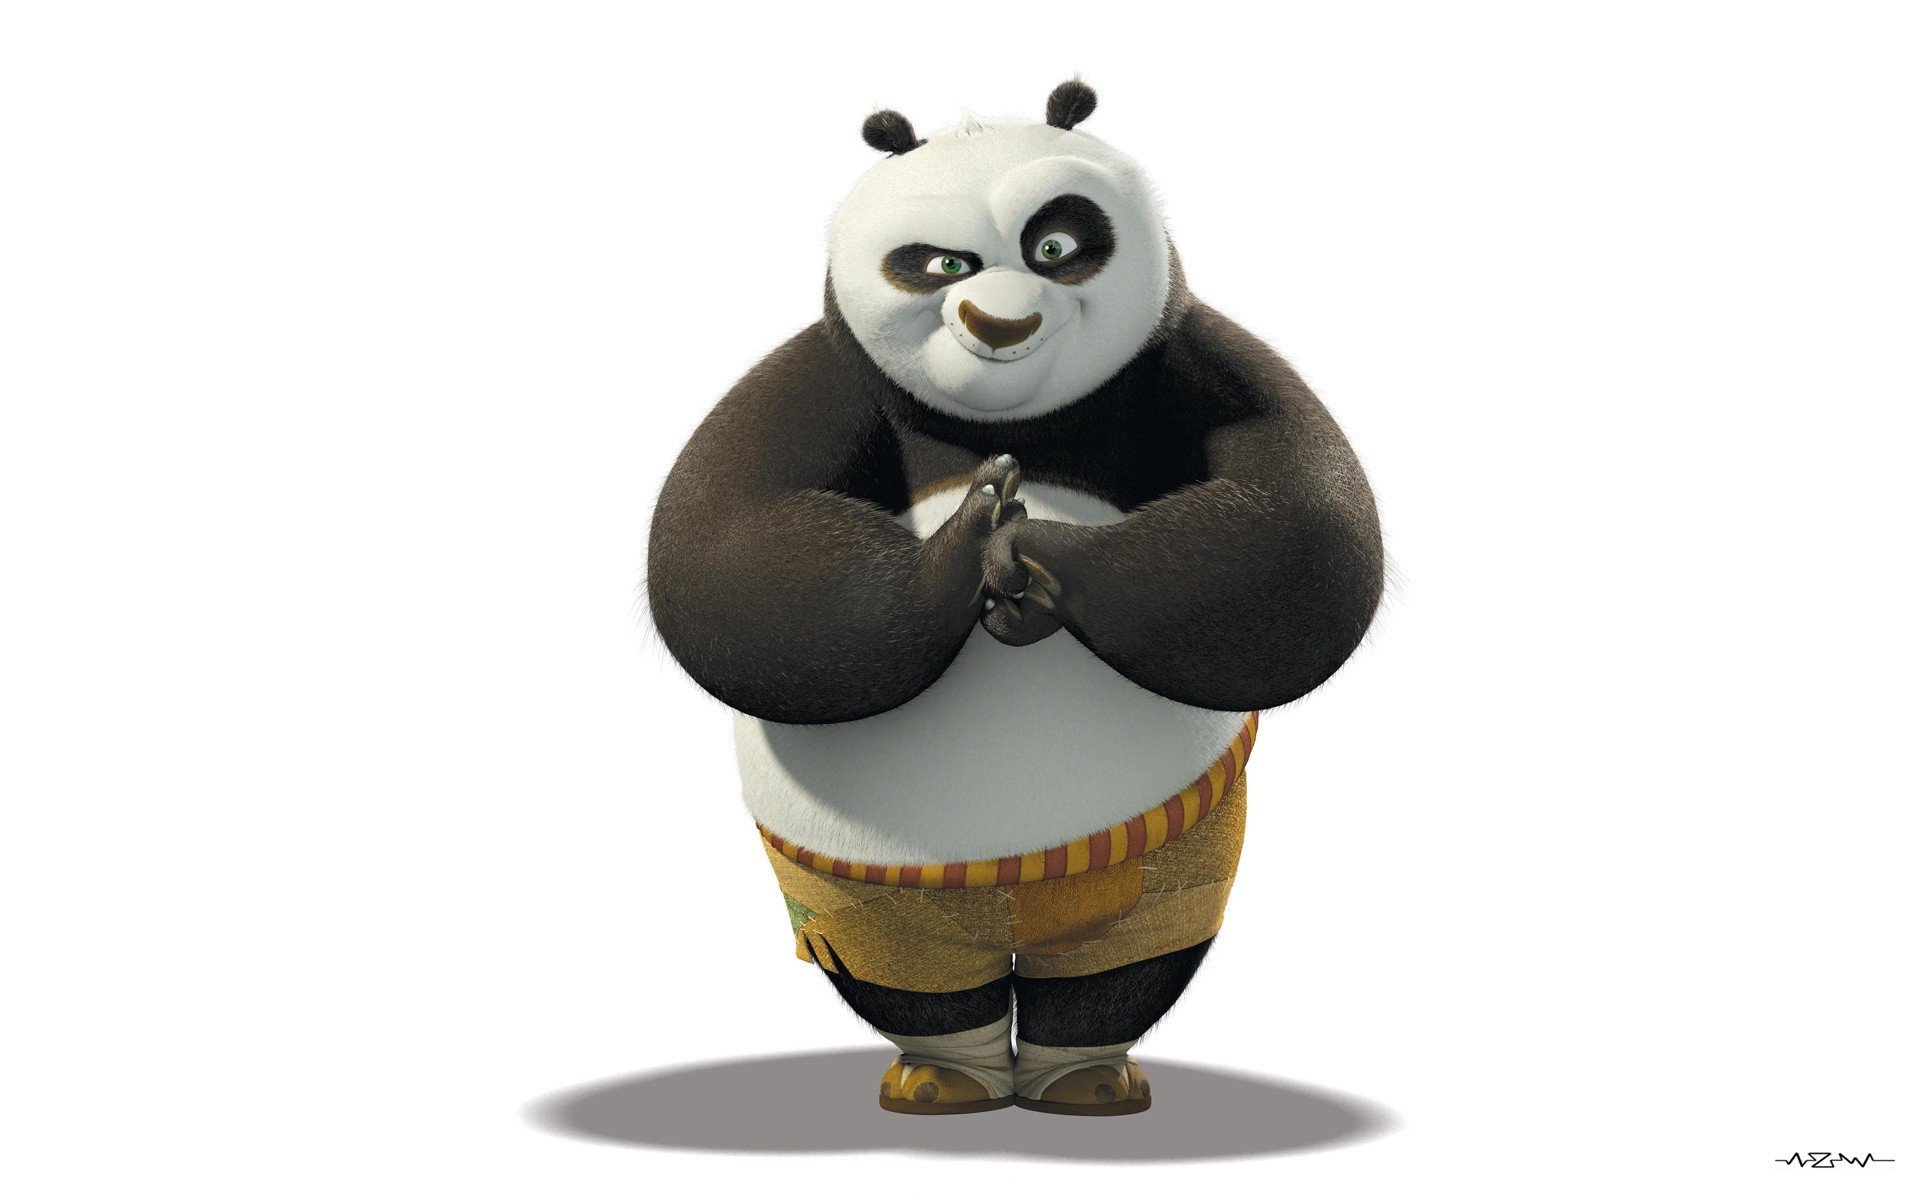 movies, Comedy, Animation, Jack, Black, Kung, Fu, Panda, Kung, Fu,  Entertainment Wallpapers HD / Desktop and Mobile Backgrounds